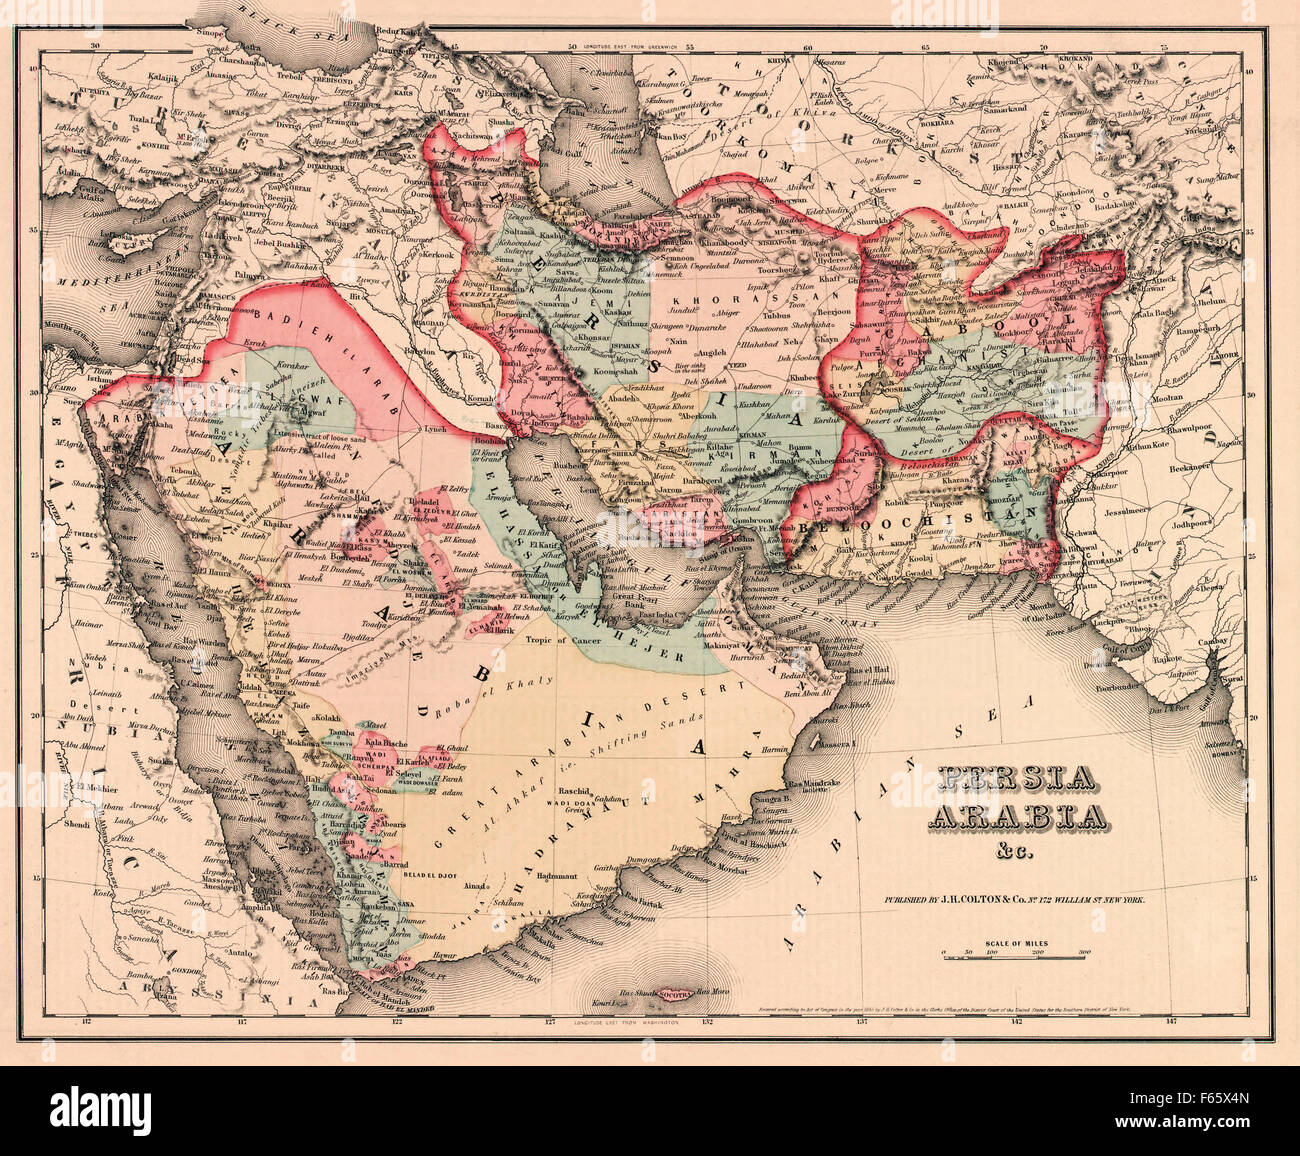 The Middle East in the mid 19th century. Persia, Arabia etc, as it was circa 1850. Stock Photo